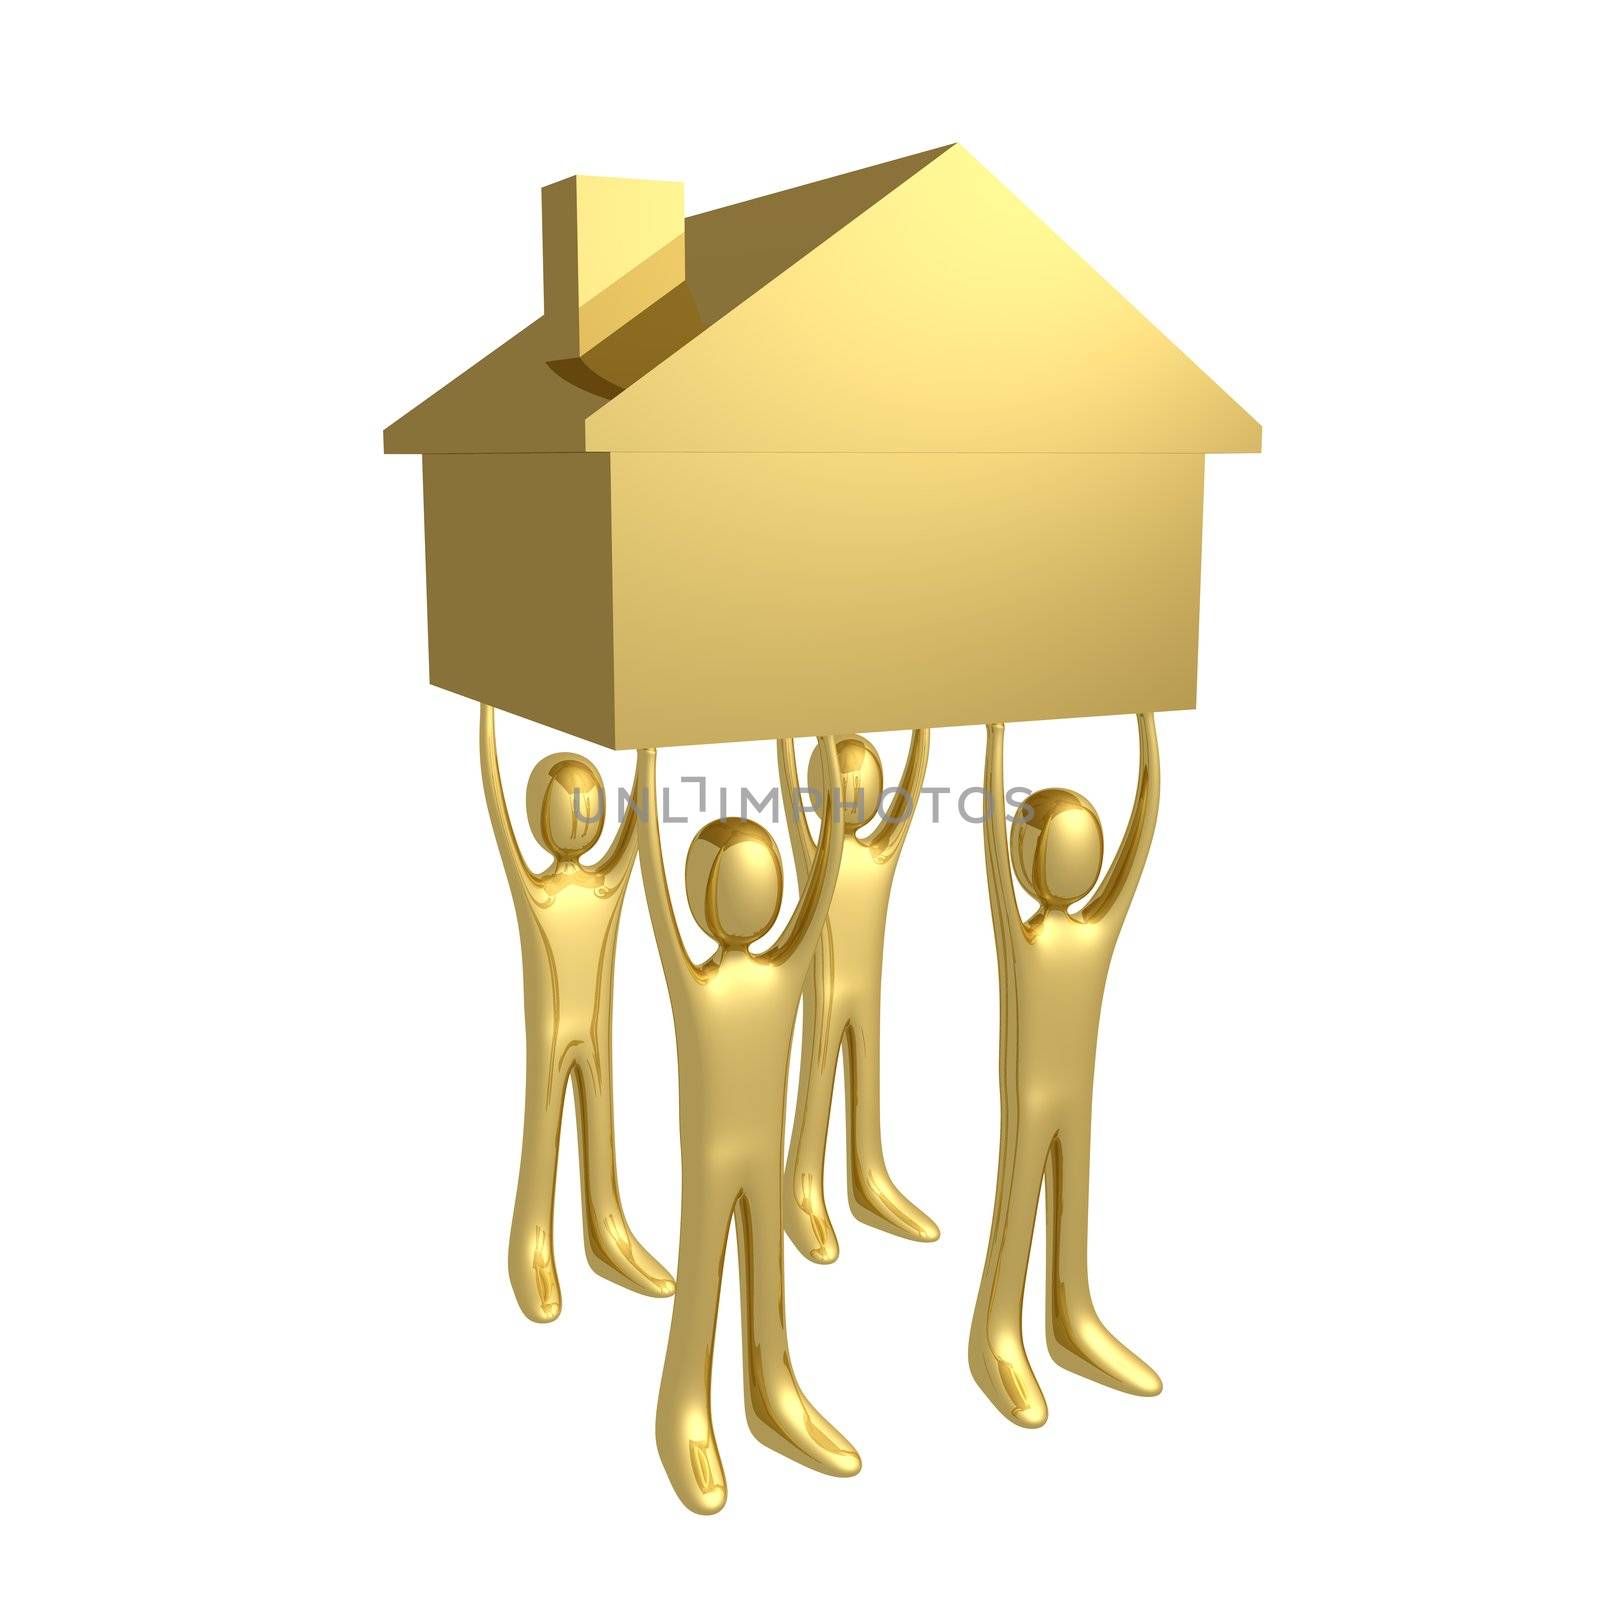 Four 3d people holding a house.